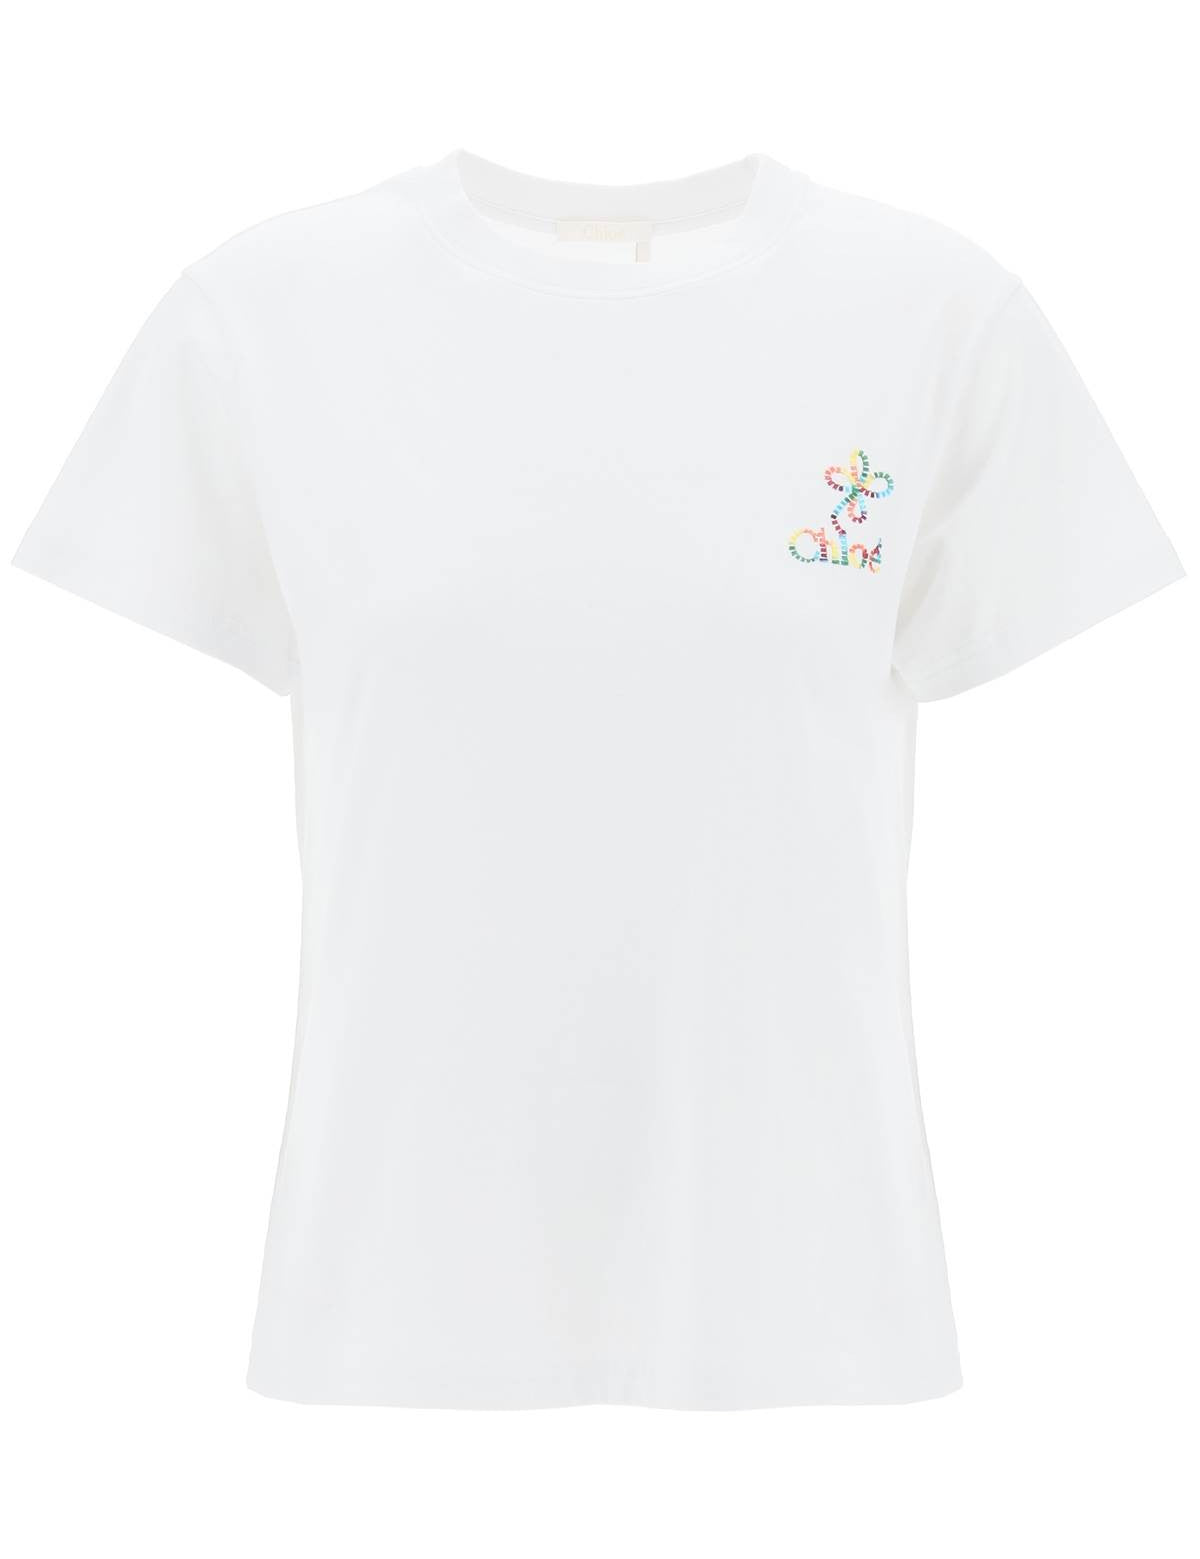 chloe-multicolor-embroidered-logo-t-shirt-with.jpg